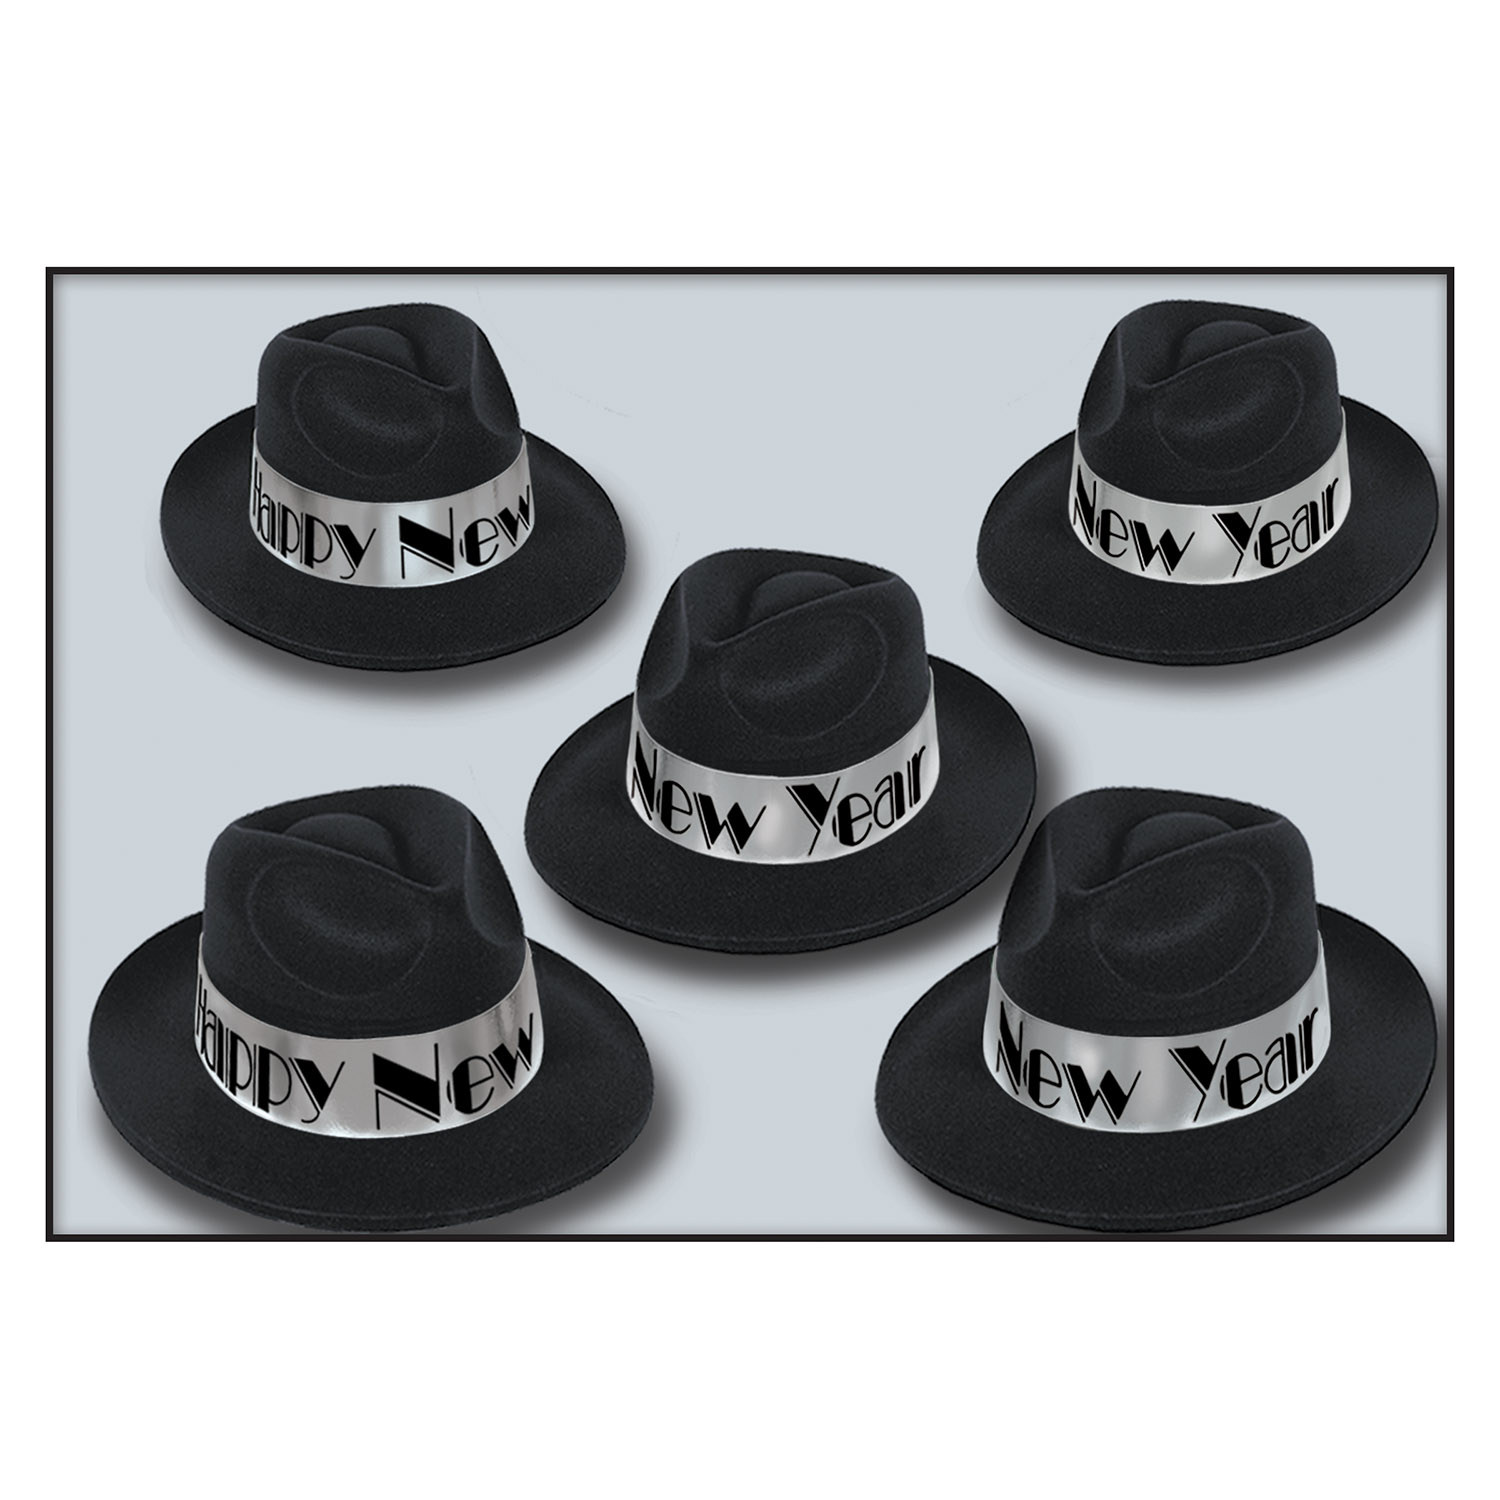 Black plastic molded fedora with velour coating and a silver band with black words that read "Happy New Year".